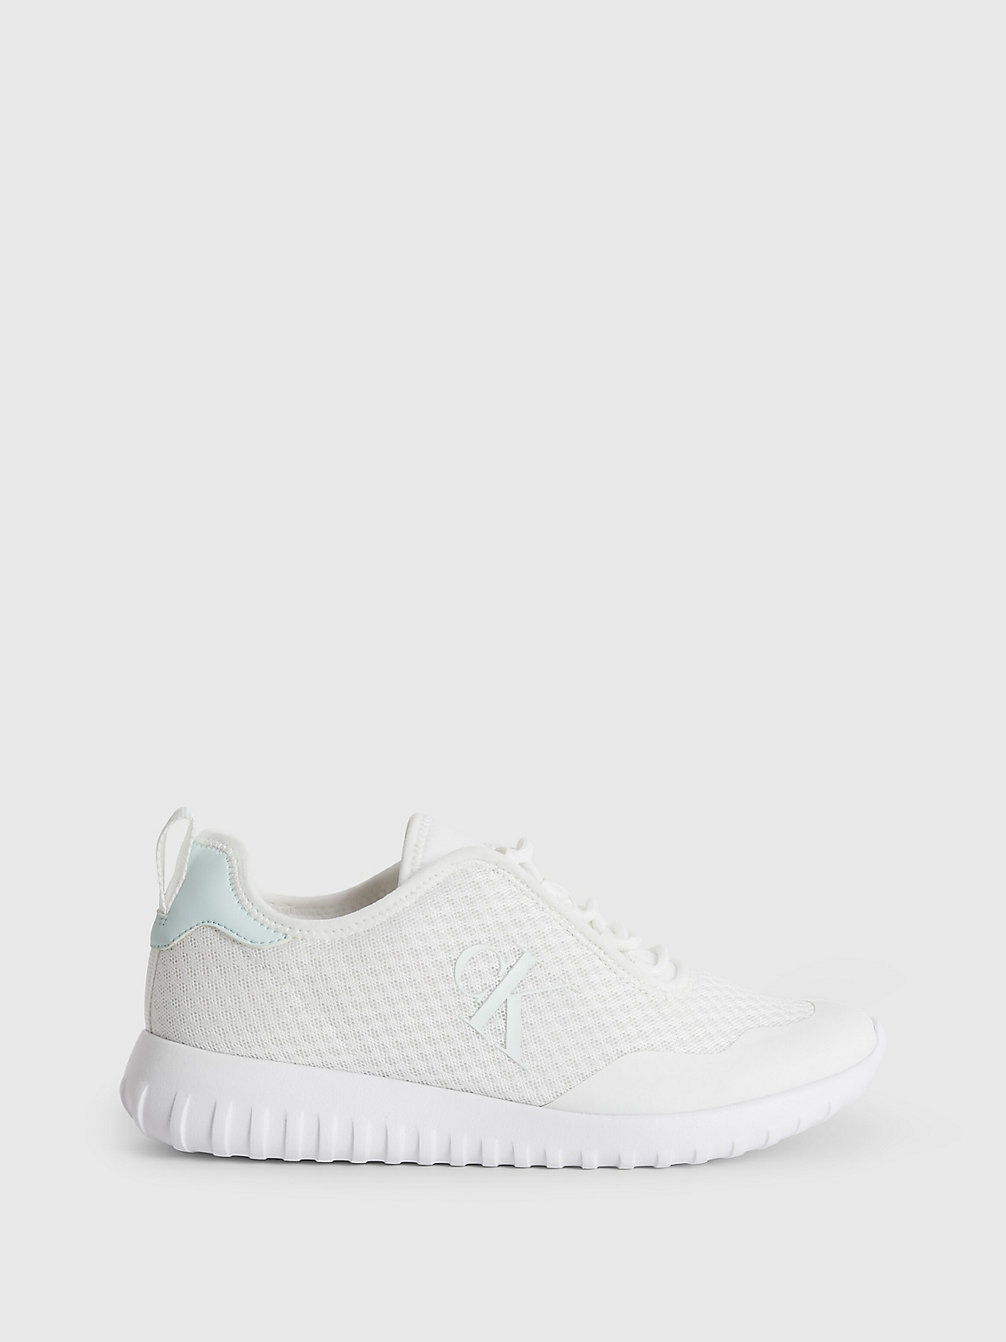 WHITE/CREAMY WHITE Recycled Mesh Trainers undefined women Calvin Klein